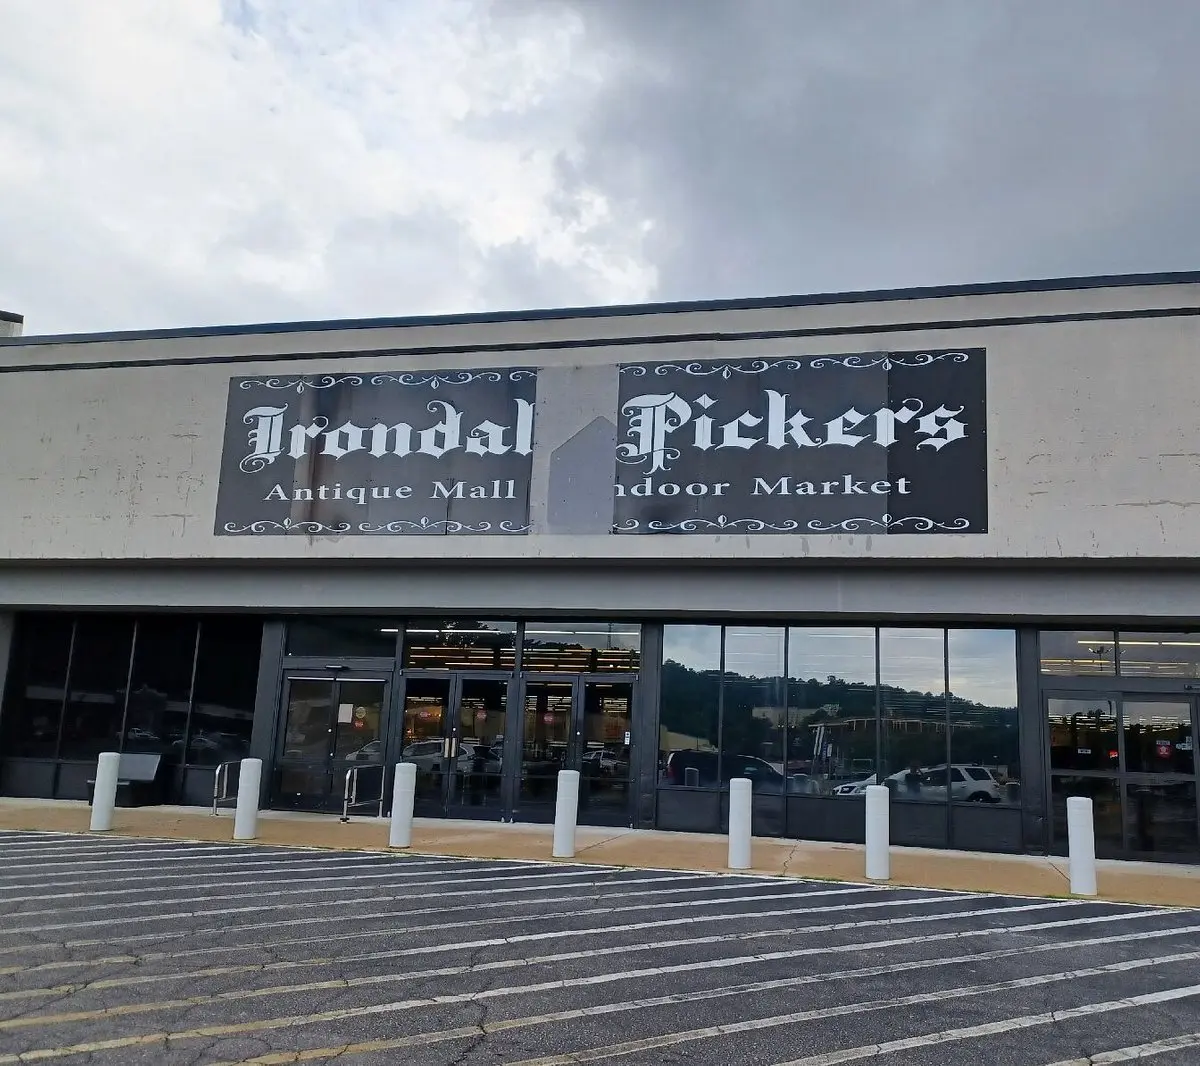 Irondale Pickers